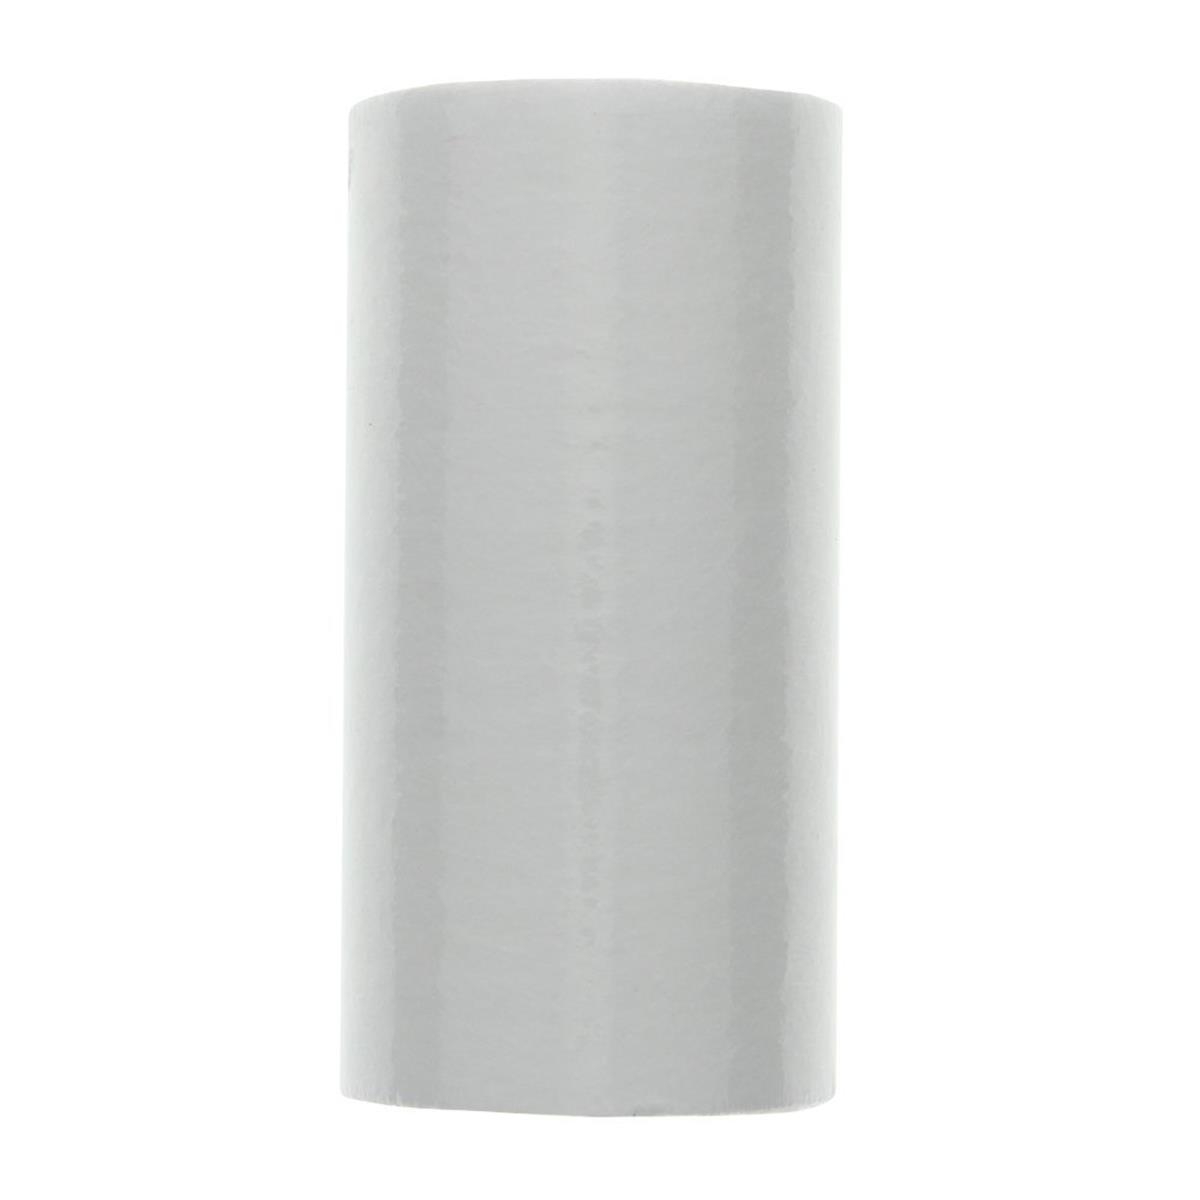 Hydronix-sdc-25-0501 Nsf Sediment Filter 2.5 In. Od X 4.87 In. Length, 1 Micron